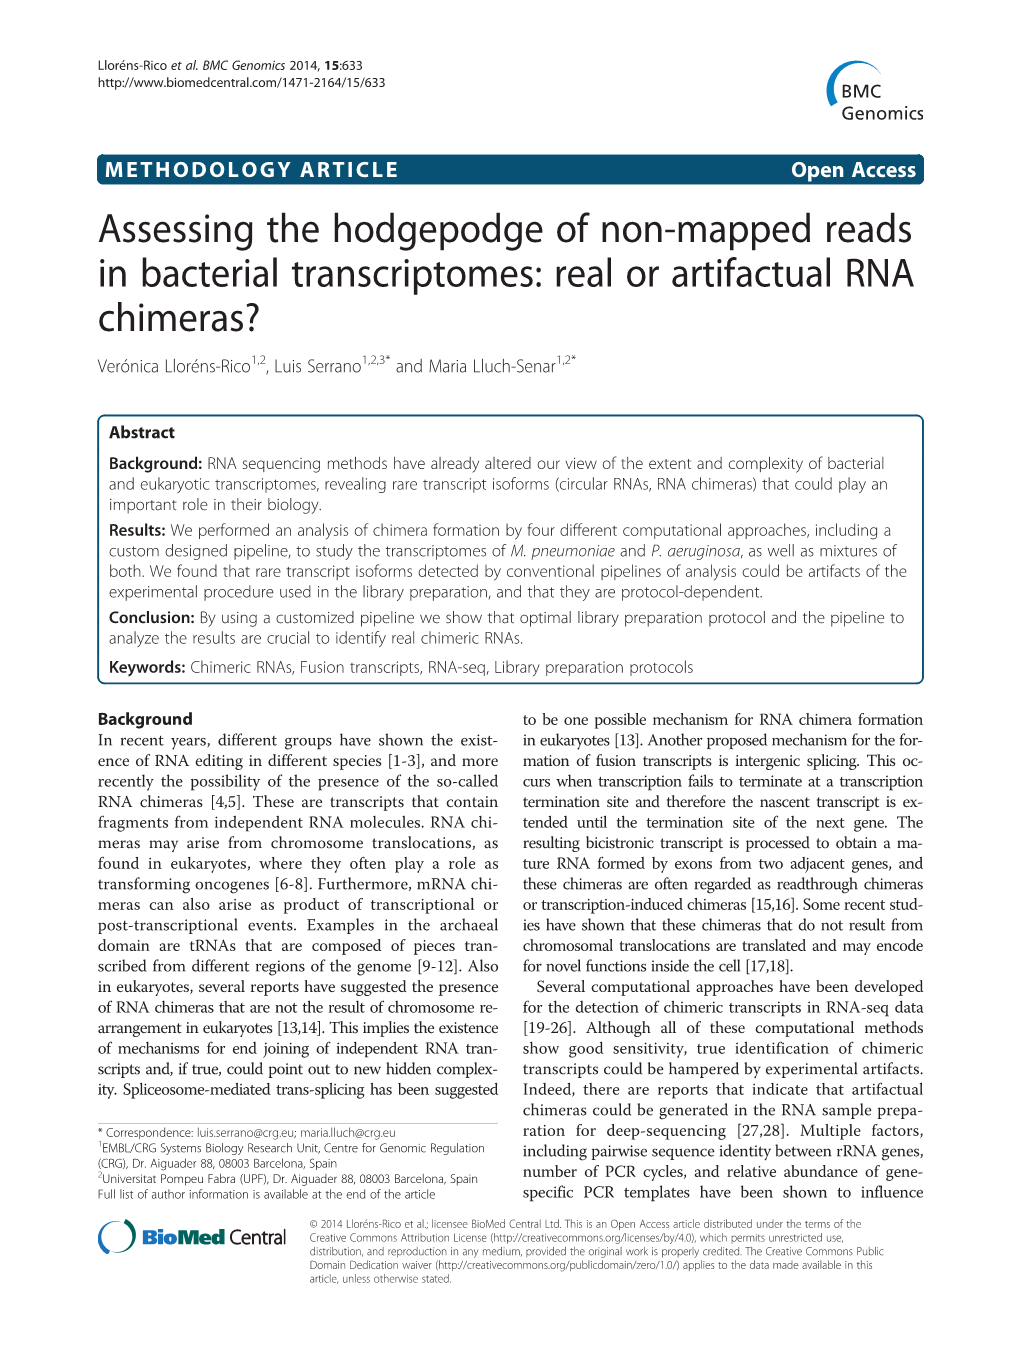 Assessing the Hodgepodge of Non-Mapped Reads in Bacterial Transcriptomes: Real Or Artifactual RNA Chimeras?